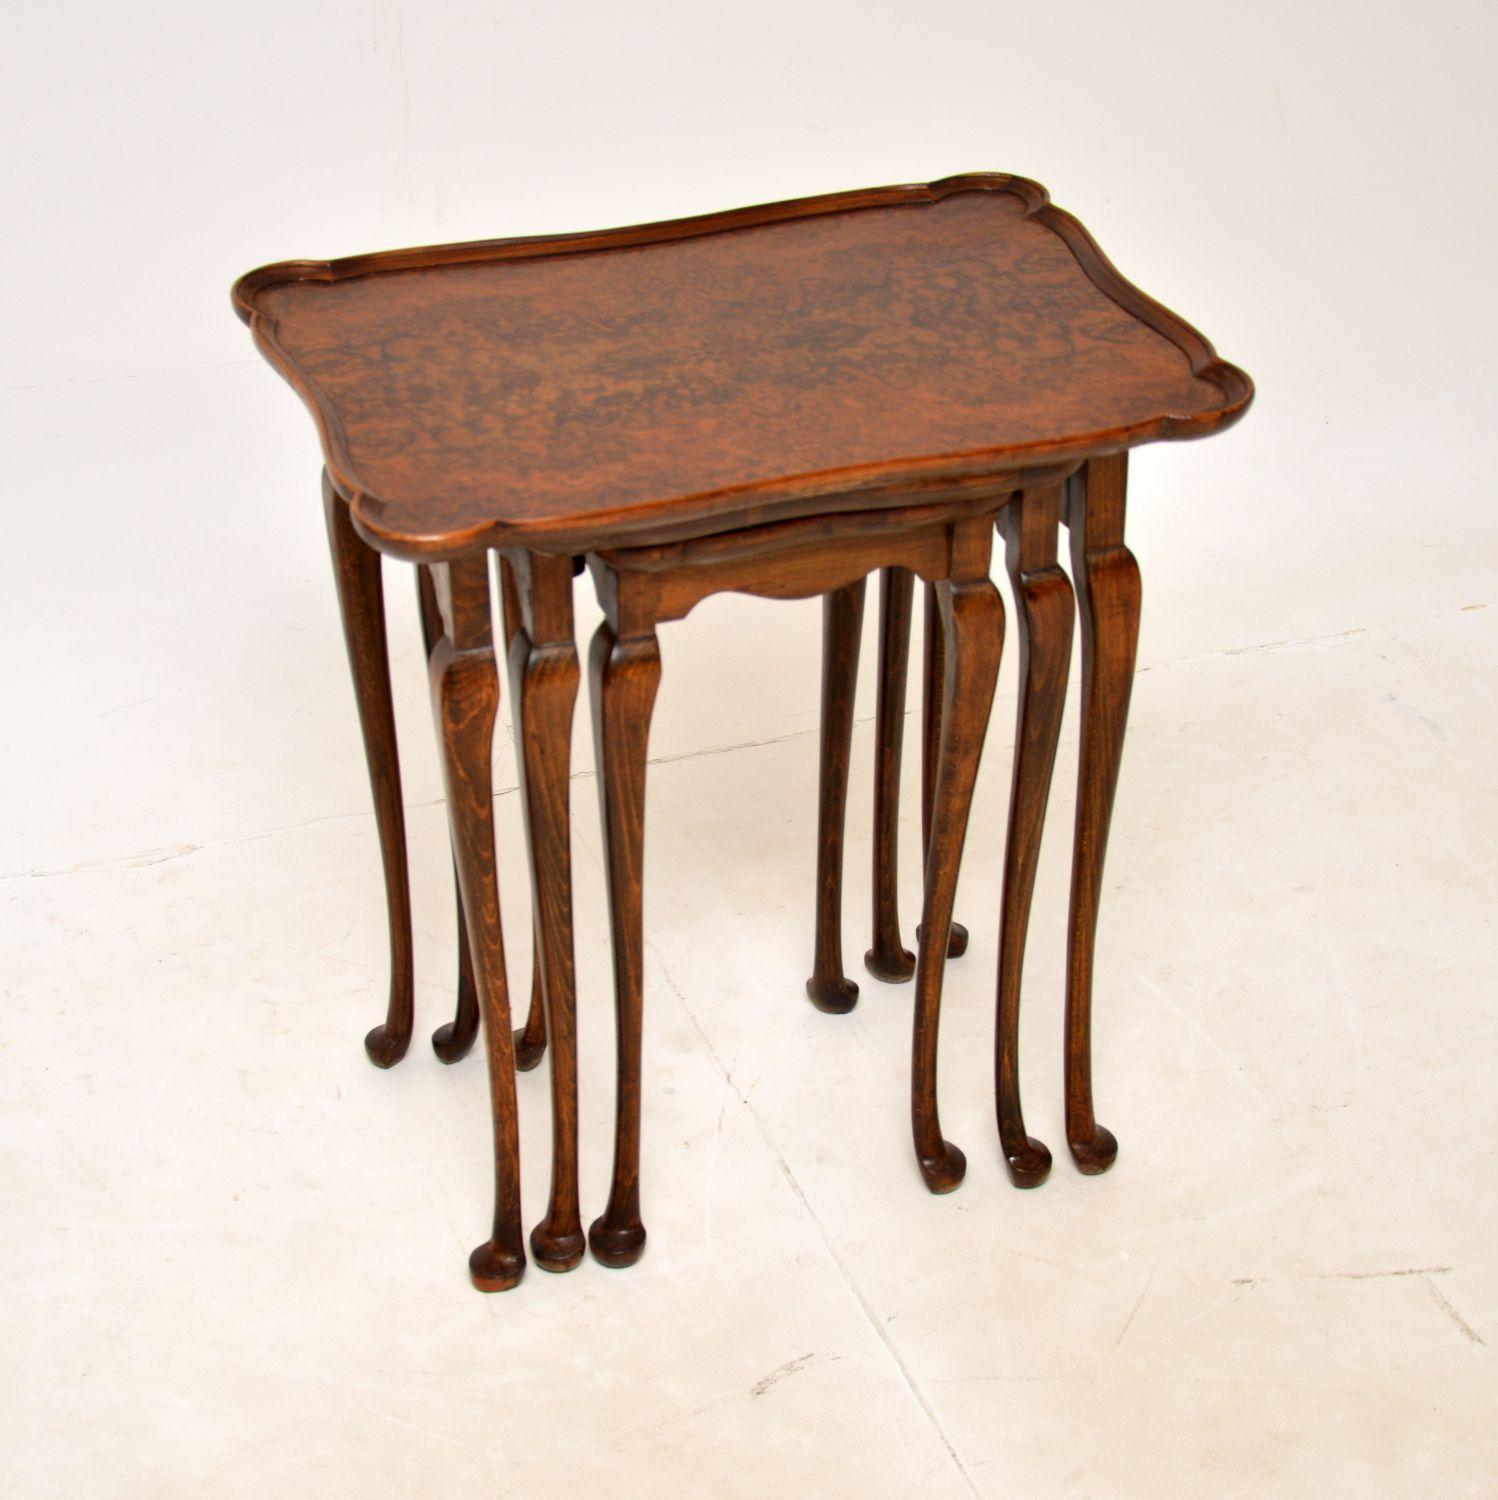 A lovely set of antique walnut nesting tables with pie crust tops. They were made in England, and date from around the 1900-1910 period.

They are of good quality, with stunning burr walnut grain patterns on the tops. They sit on elegant cabriole